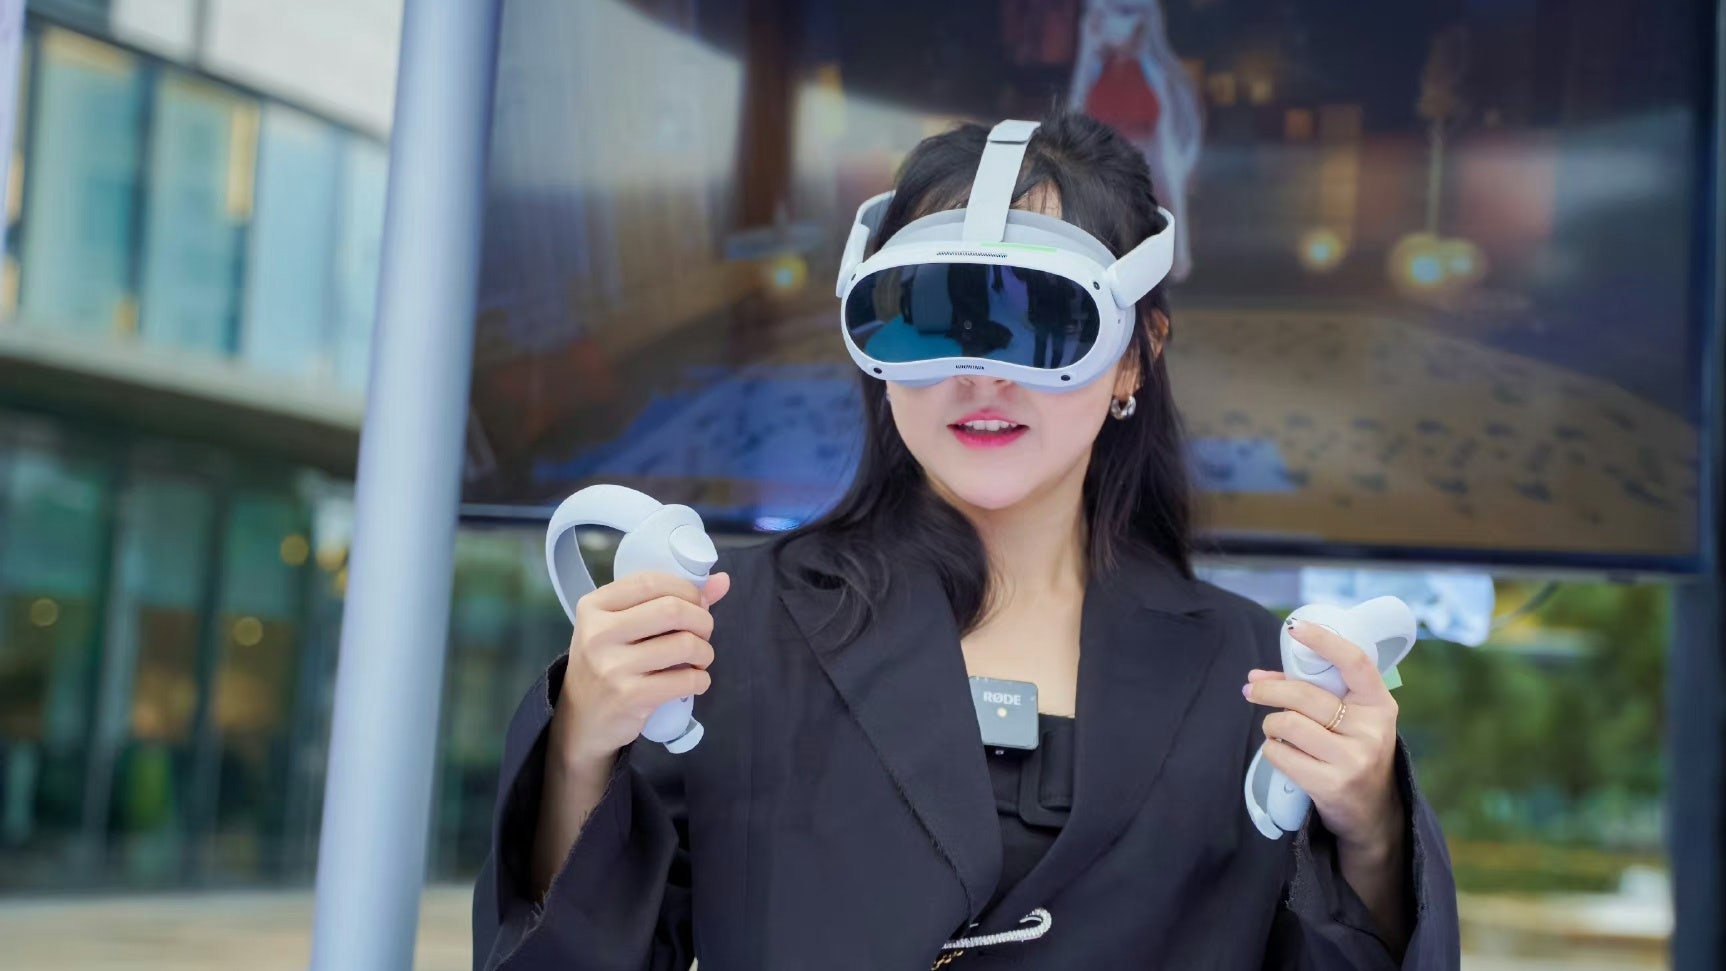 Jing Daily decodes the Chinese tech giant’s moves as the metaverse race heats up and China clarifies its position on artificial intelligence. Photo: Pico